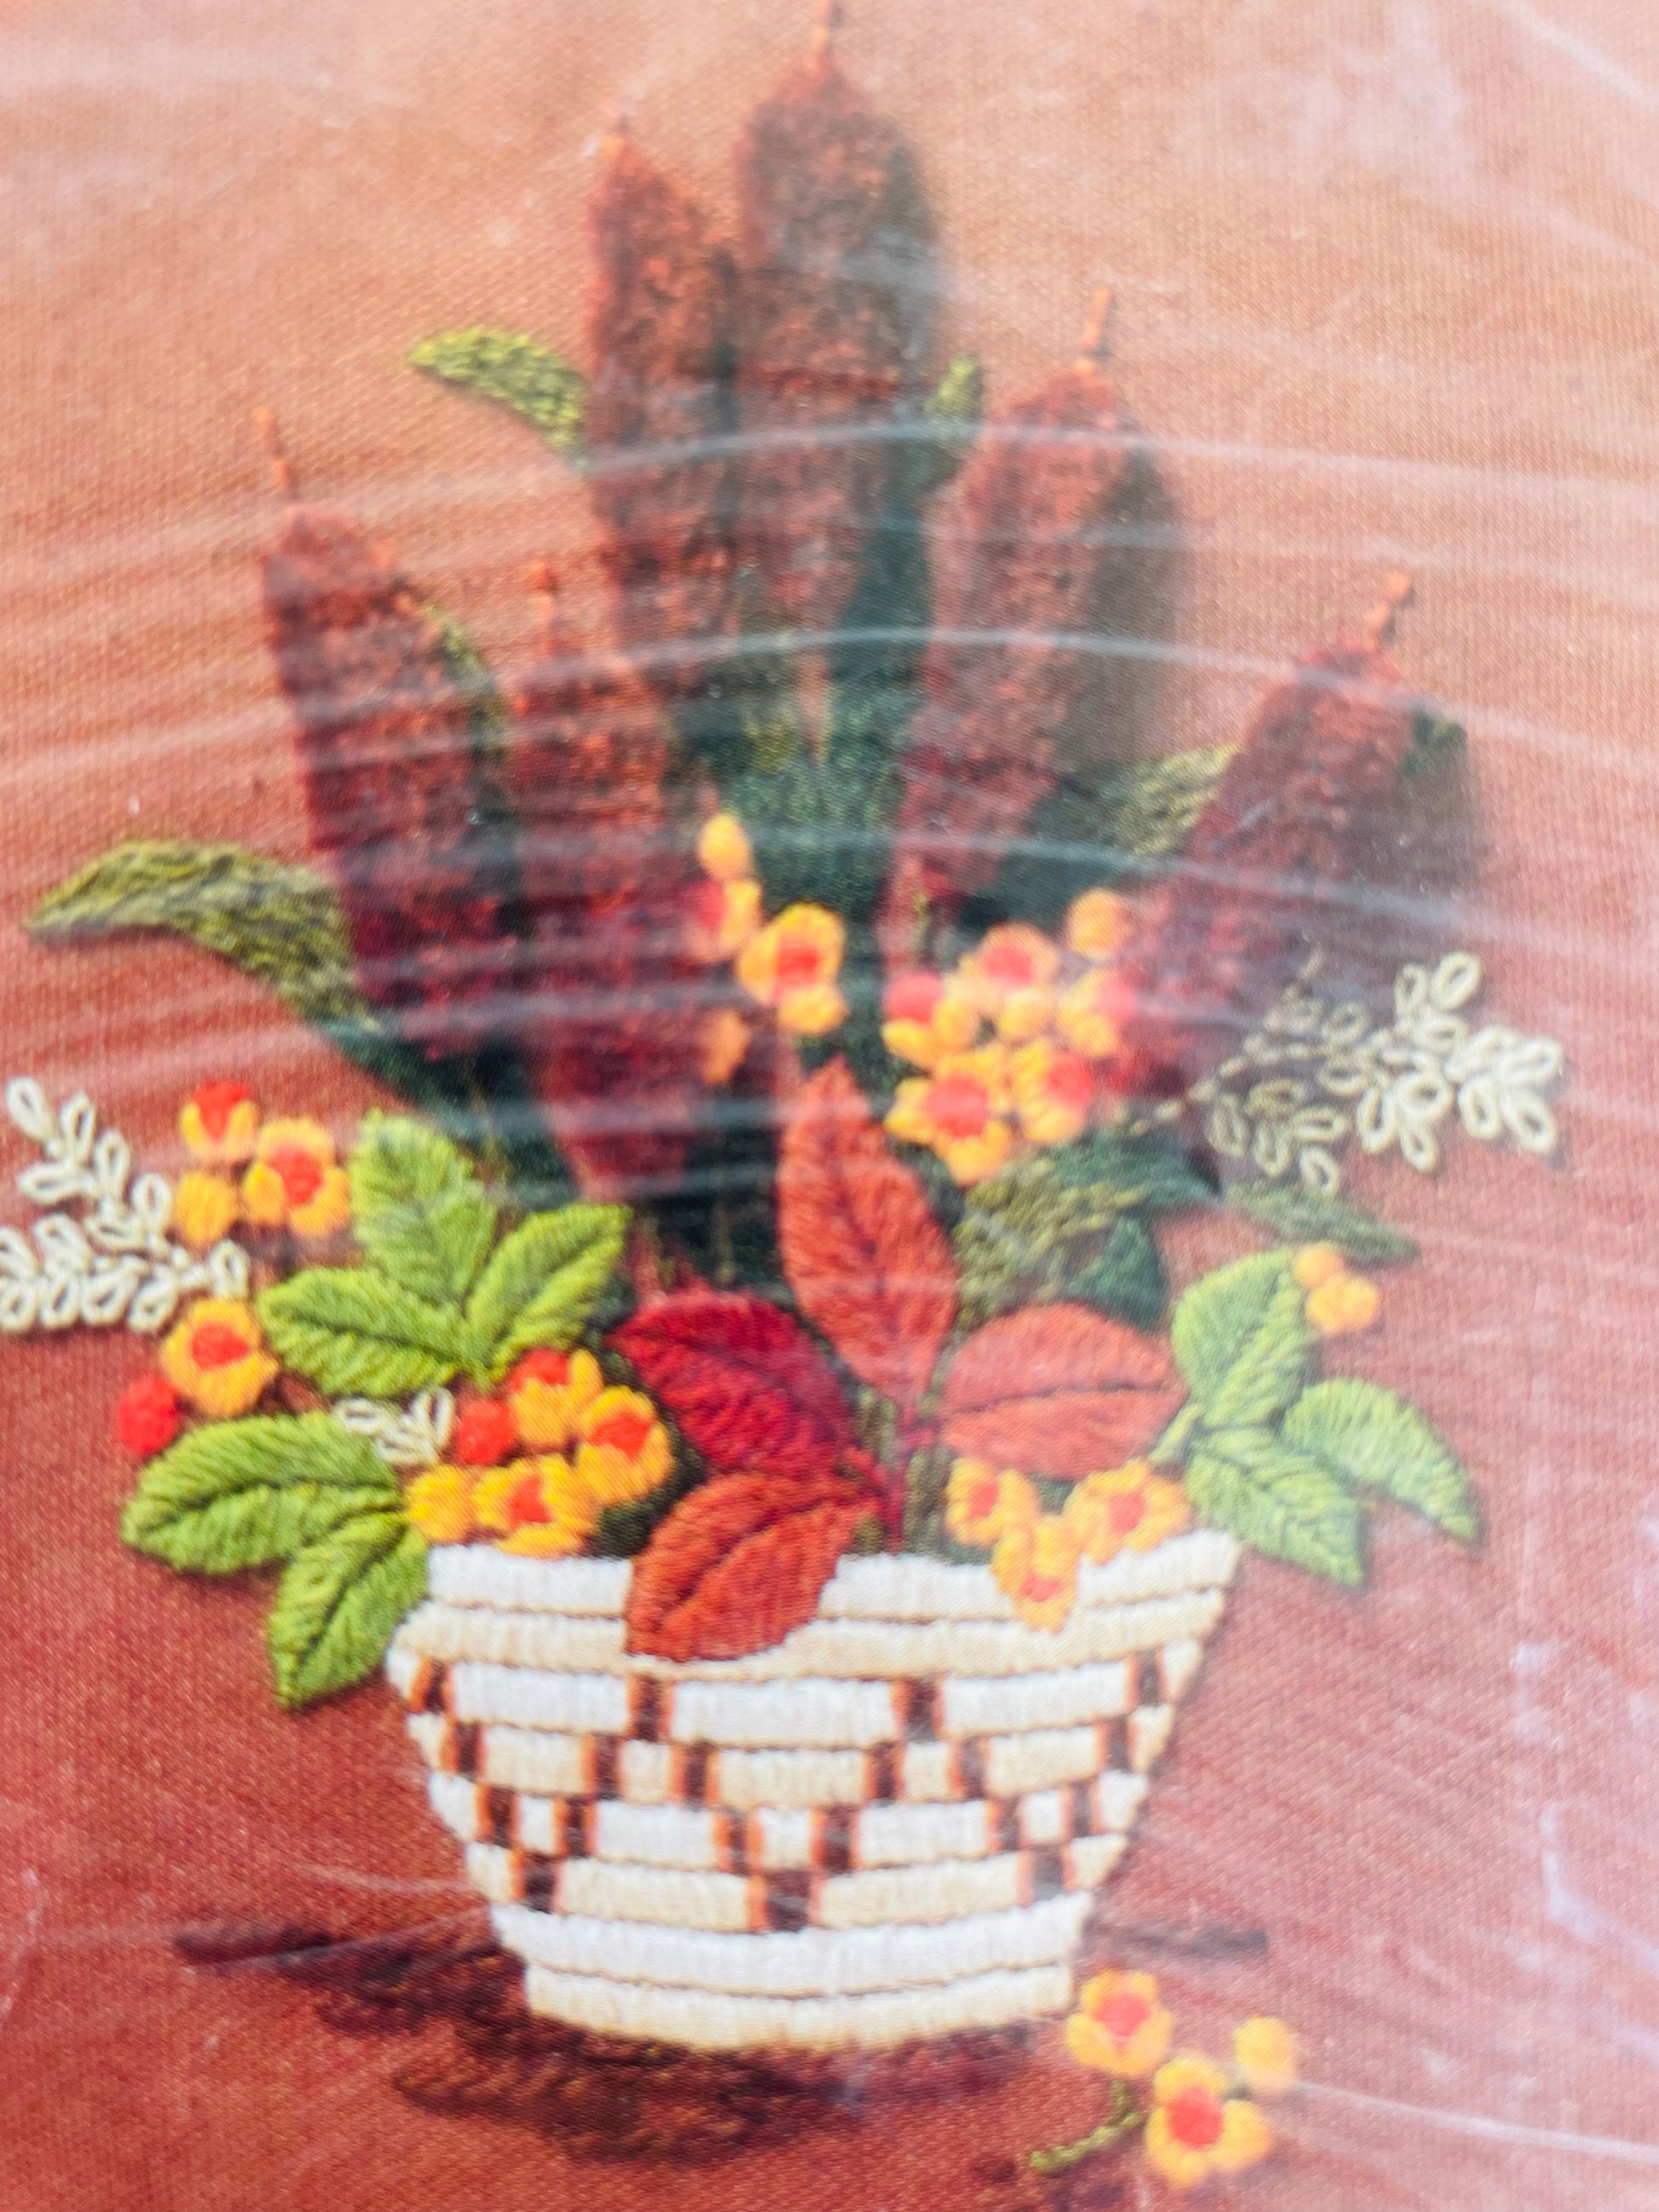 Strawberry Gingham Vintage Crewel Embroidery kit by Family Circle